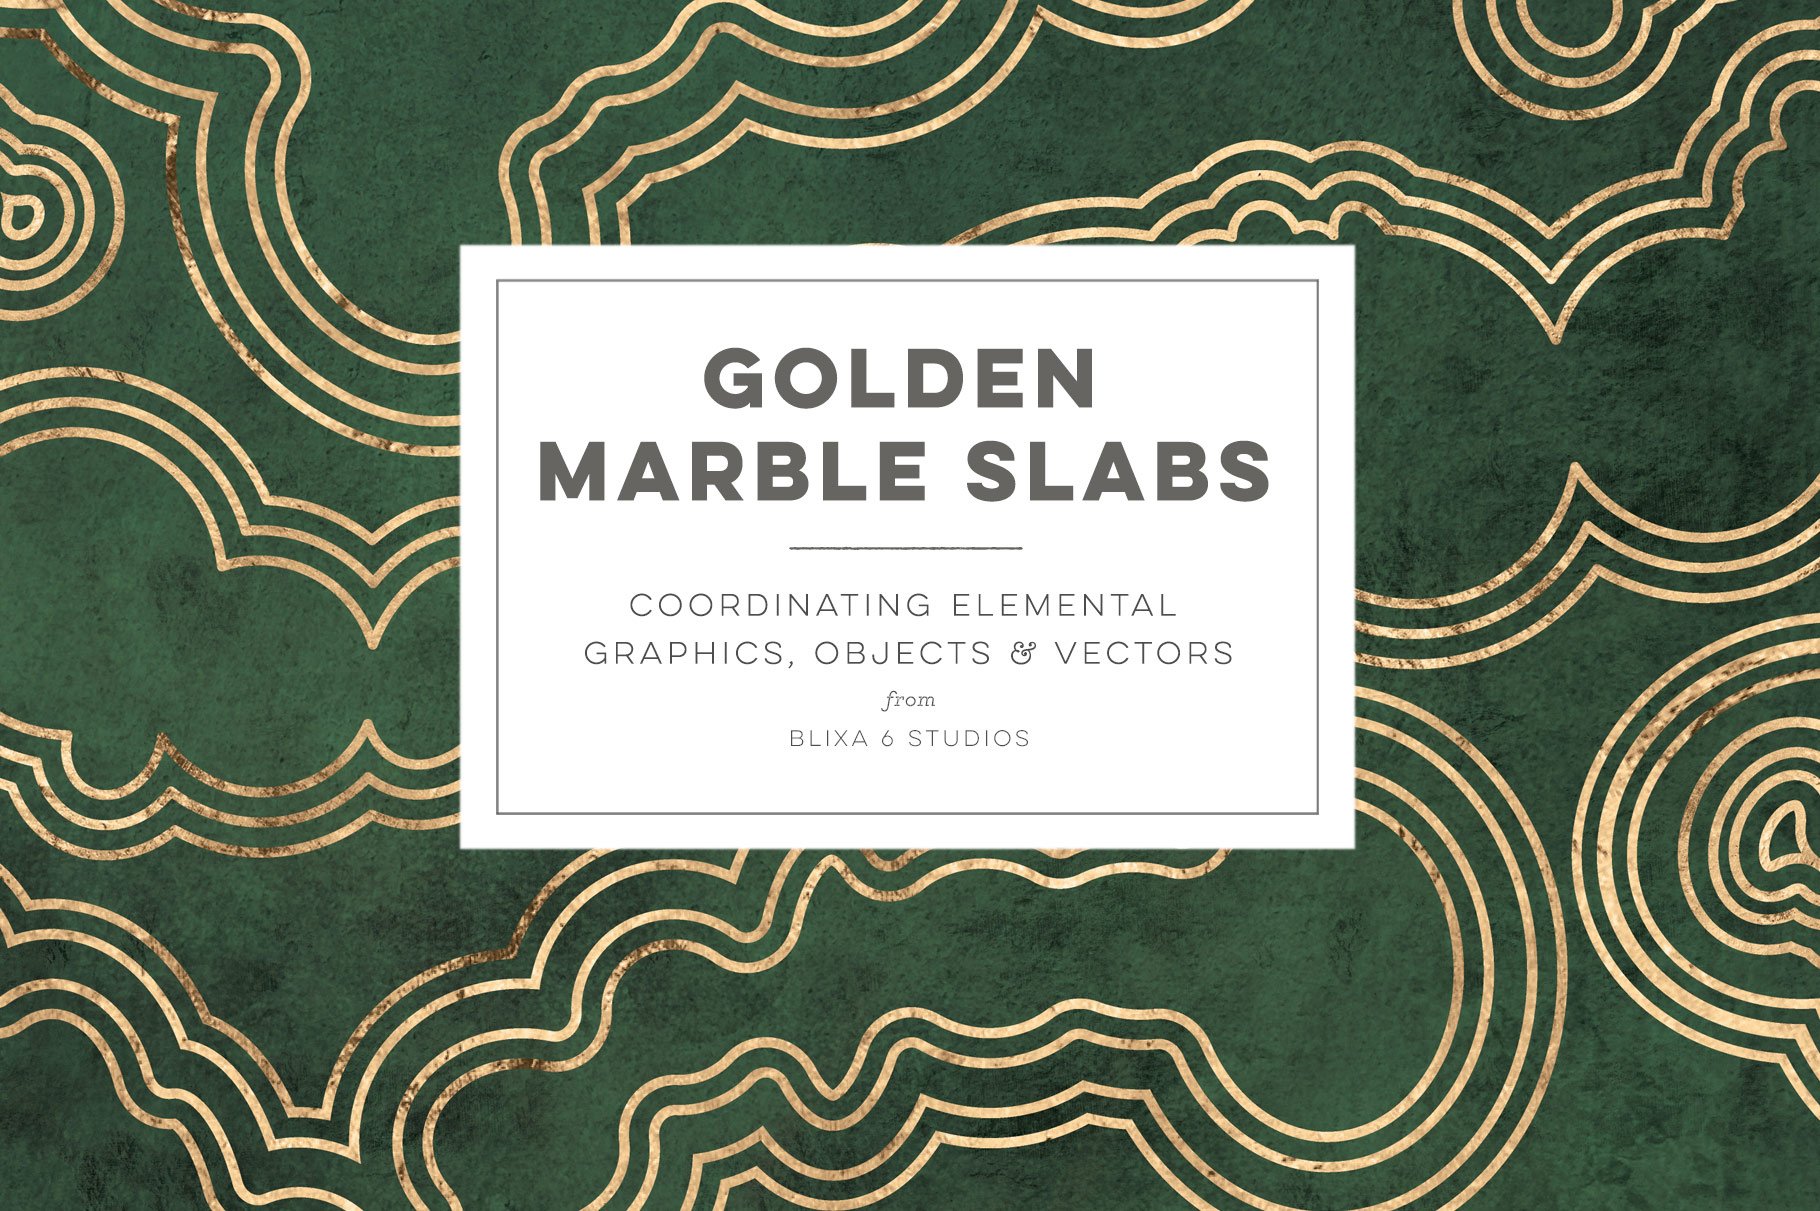 goldenmarbleslabs covergraphic 891